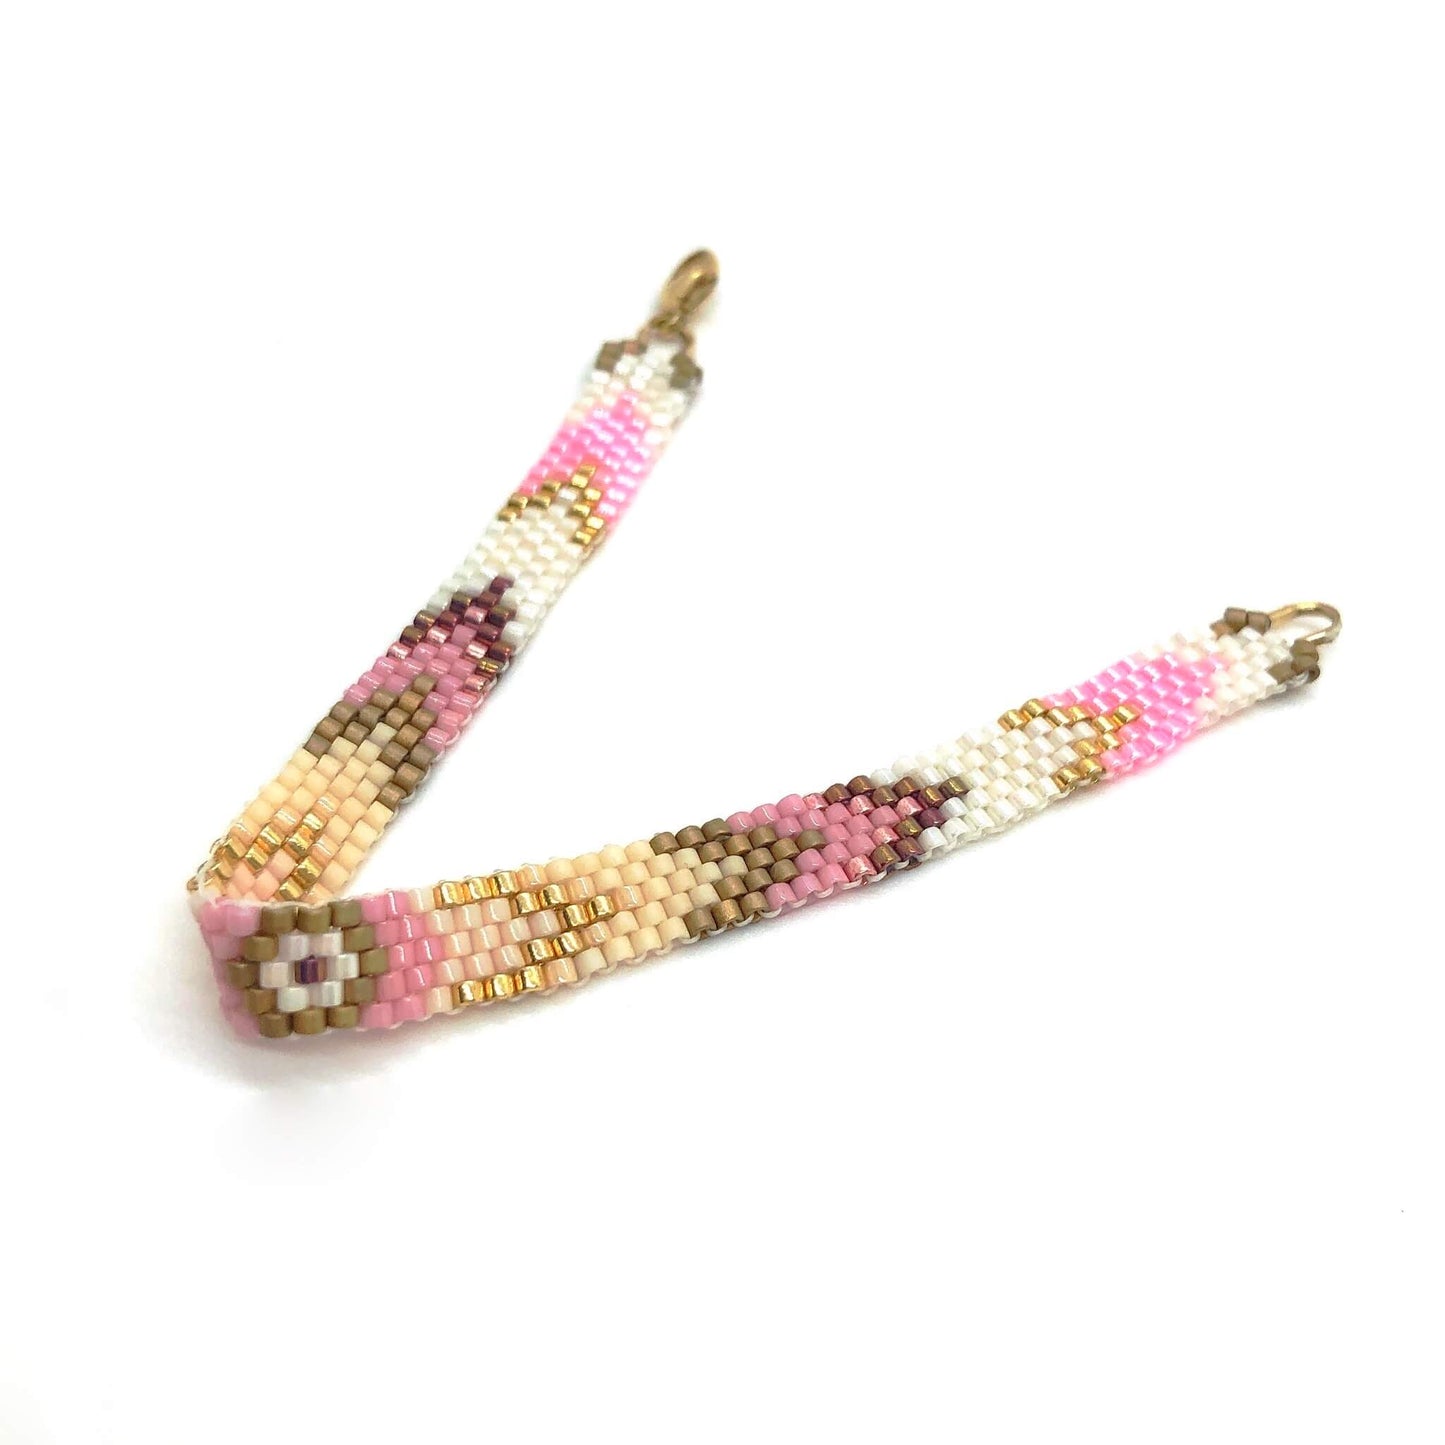 Flat beaded bracelet with pink, peach, ivory, and gold seed beads in an arrow pattern.